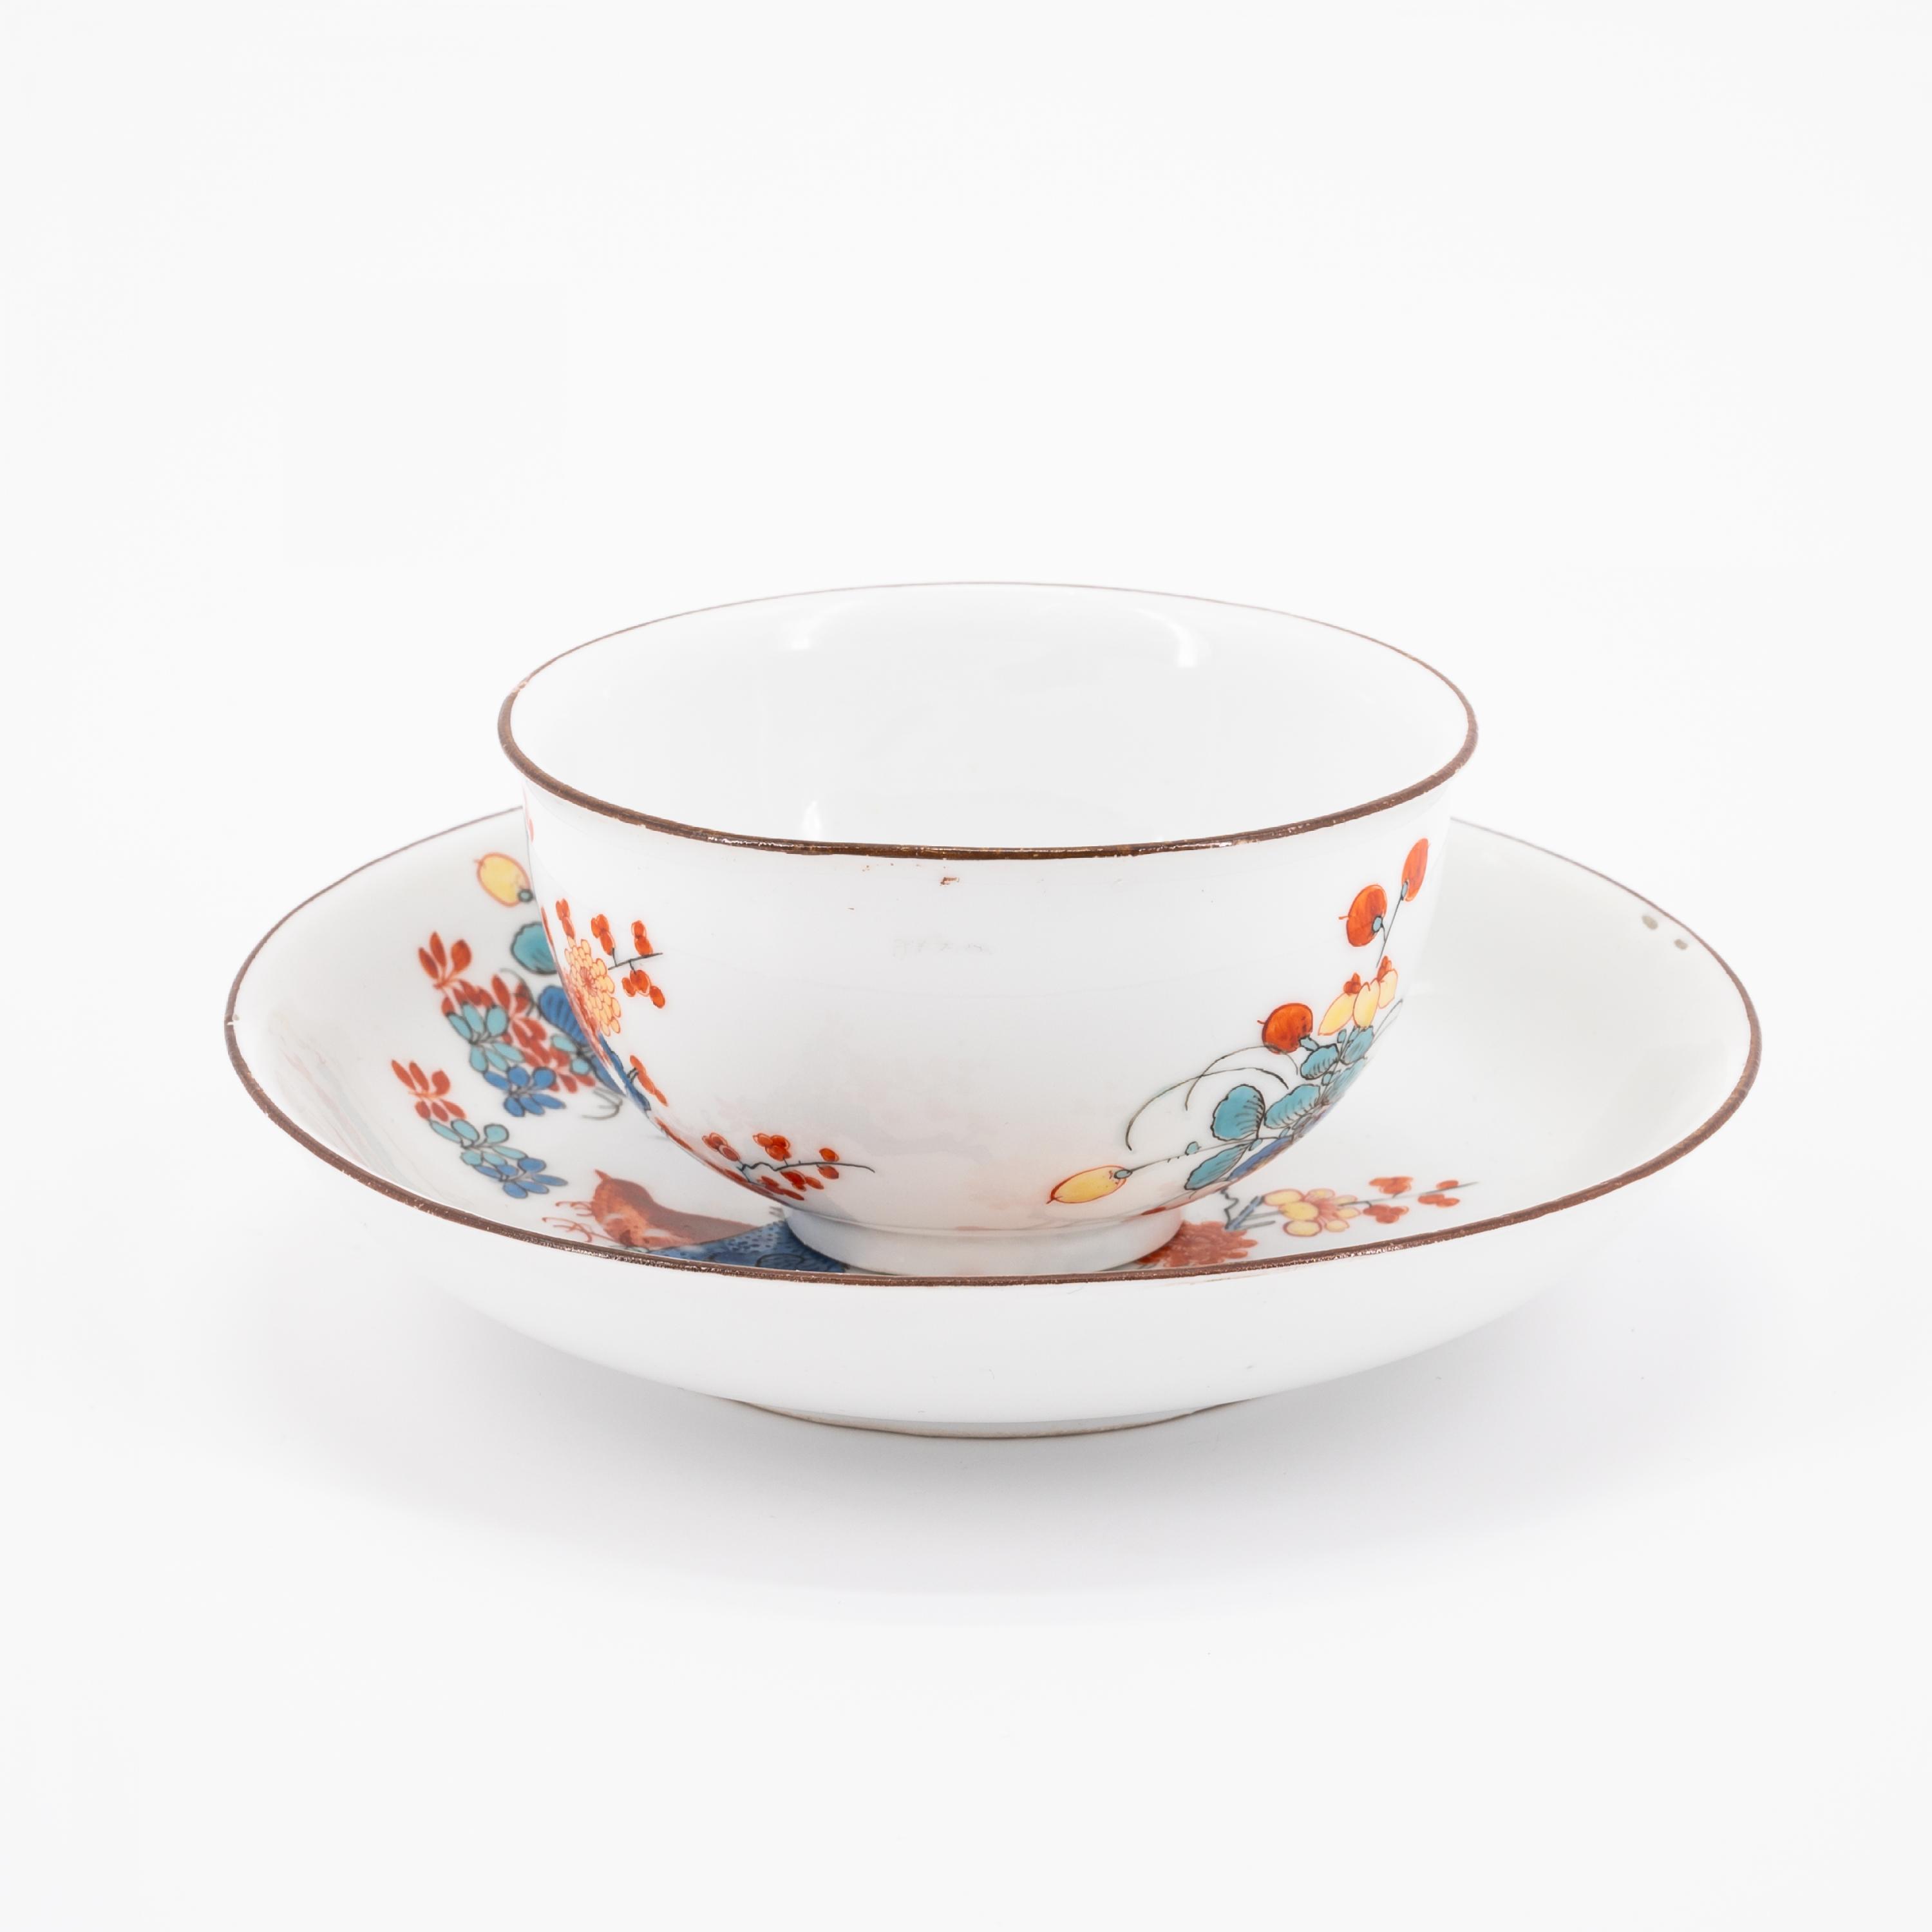 ONE PORCELAIN CUP AND SAUCER WITH QUAIL DECOR & TWO CUPS WITH PURPLE BACKGROUND AND BIRD DECOATIONS - Image 7 of 11